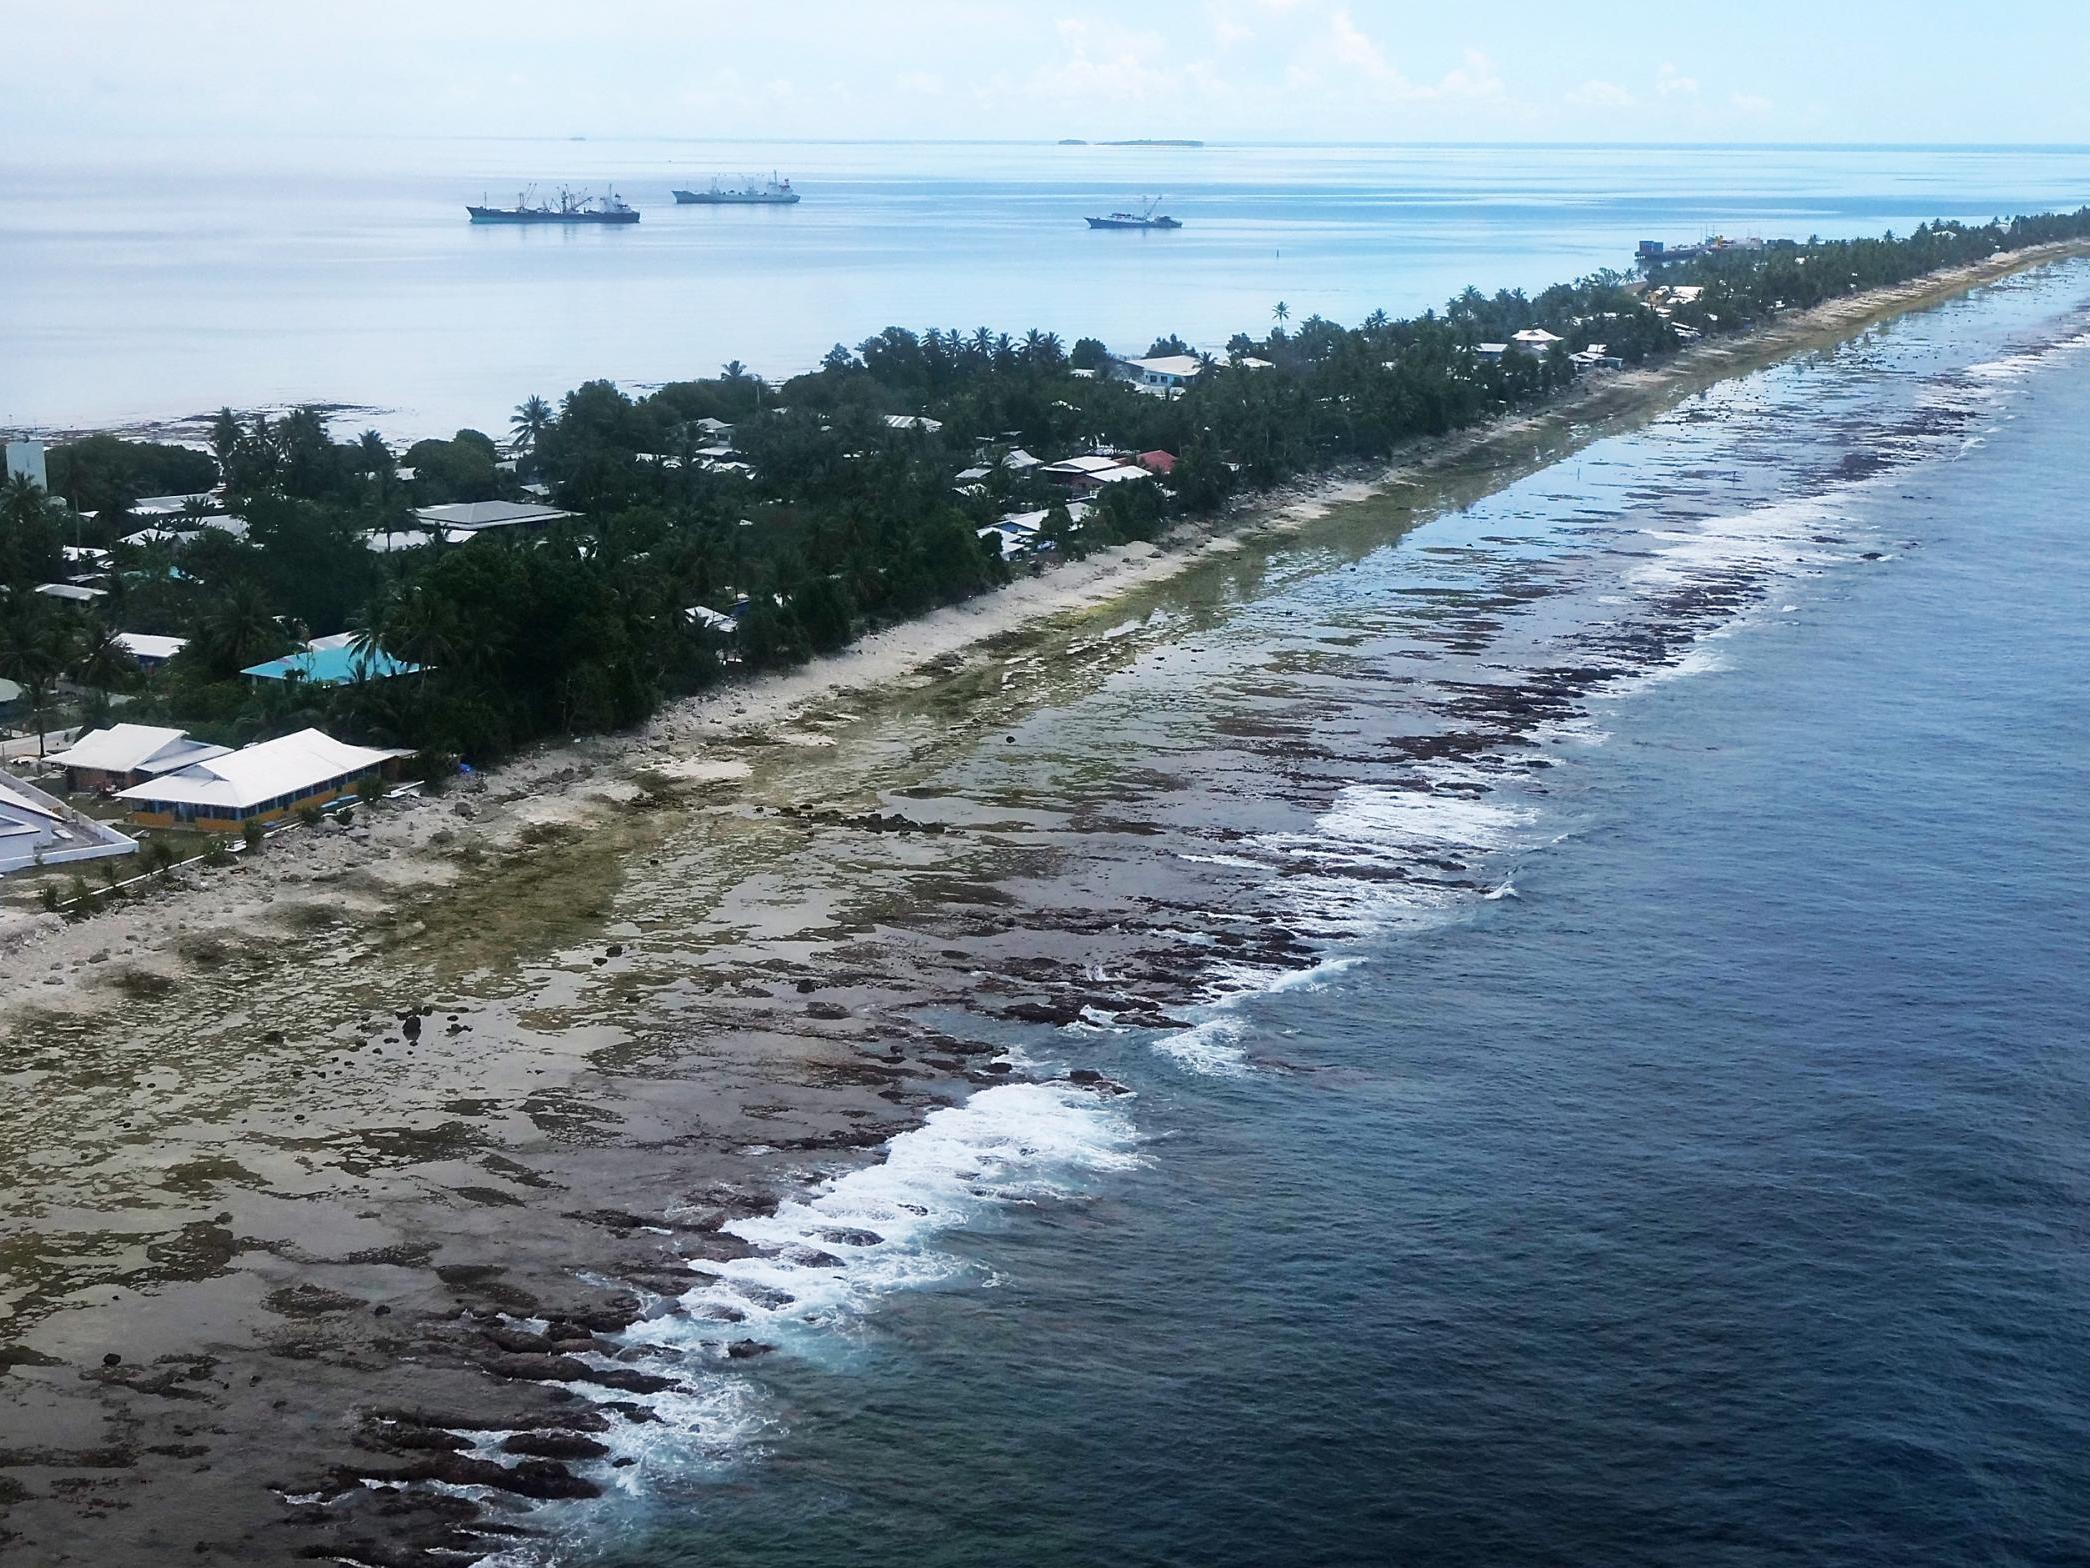 The tiny archipelago Tuvalu is among the Pacific island nations facing an "existential threat" from climate change